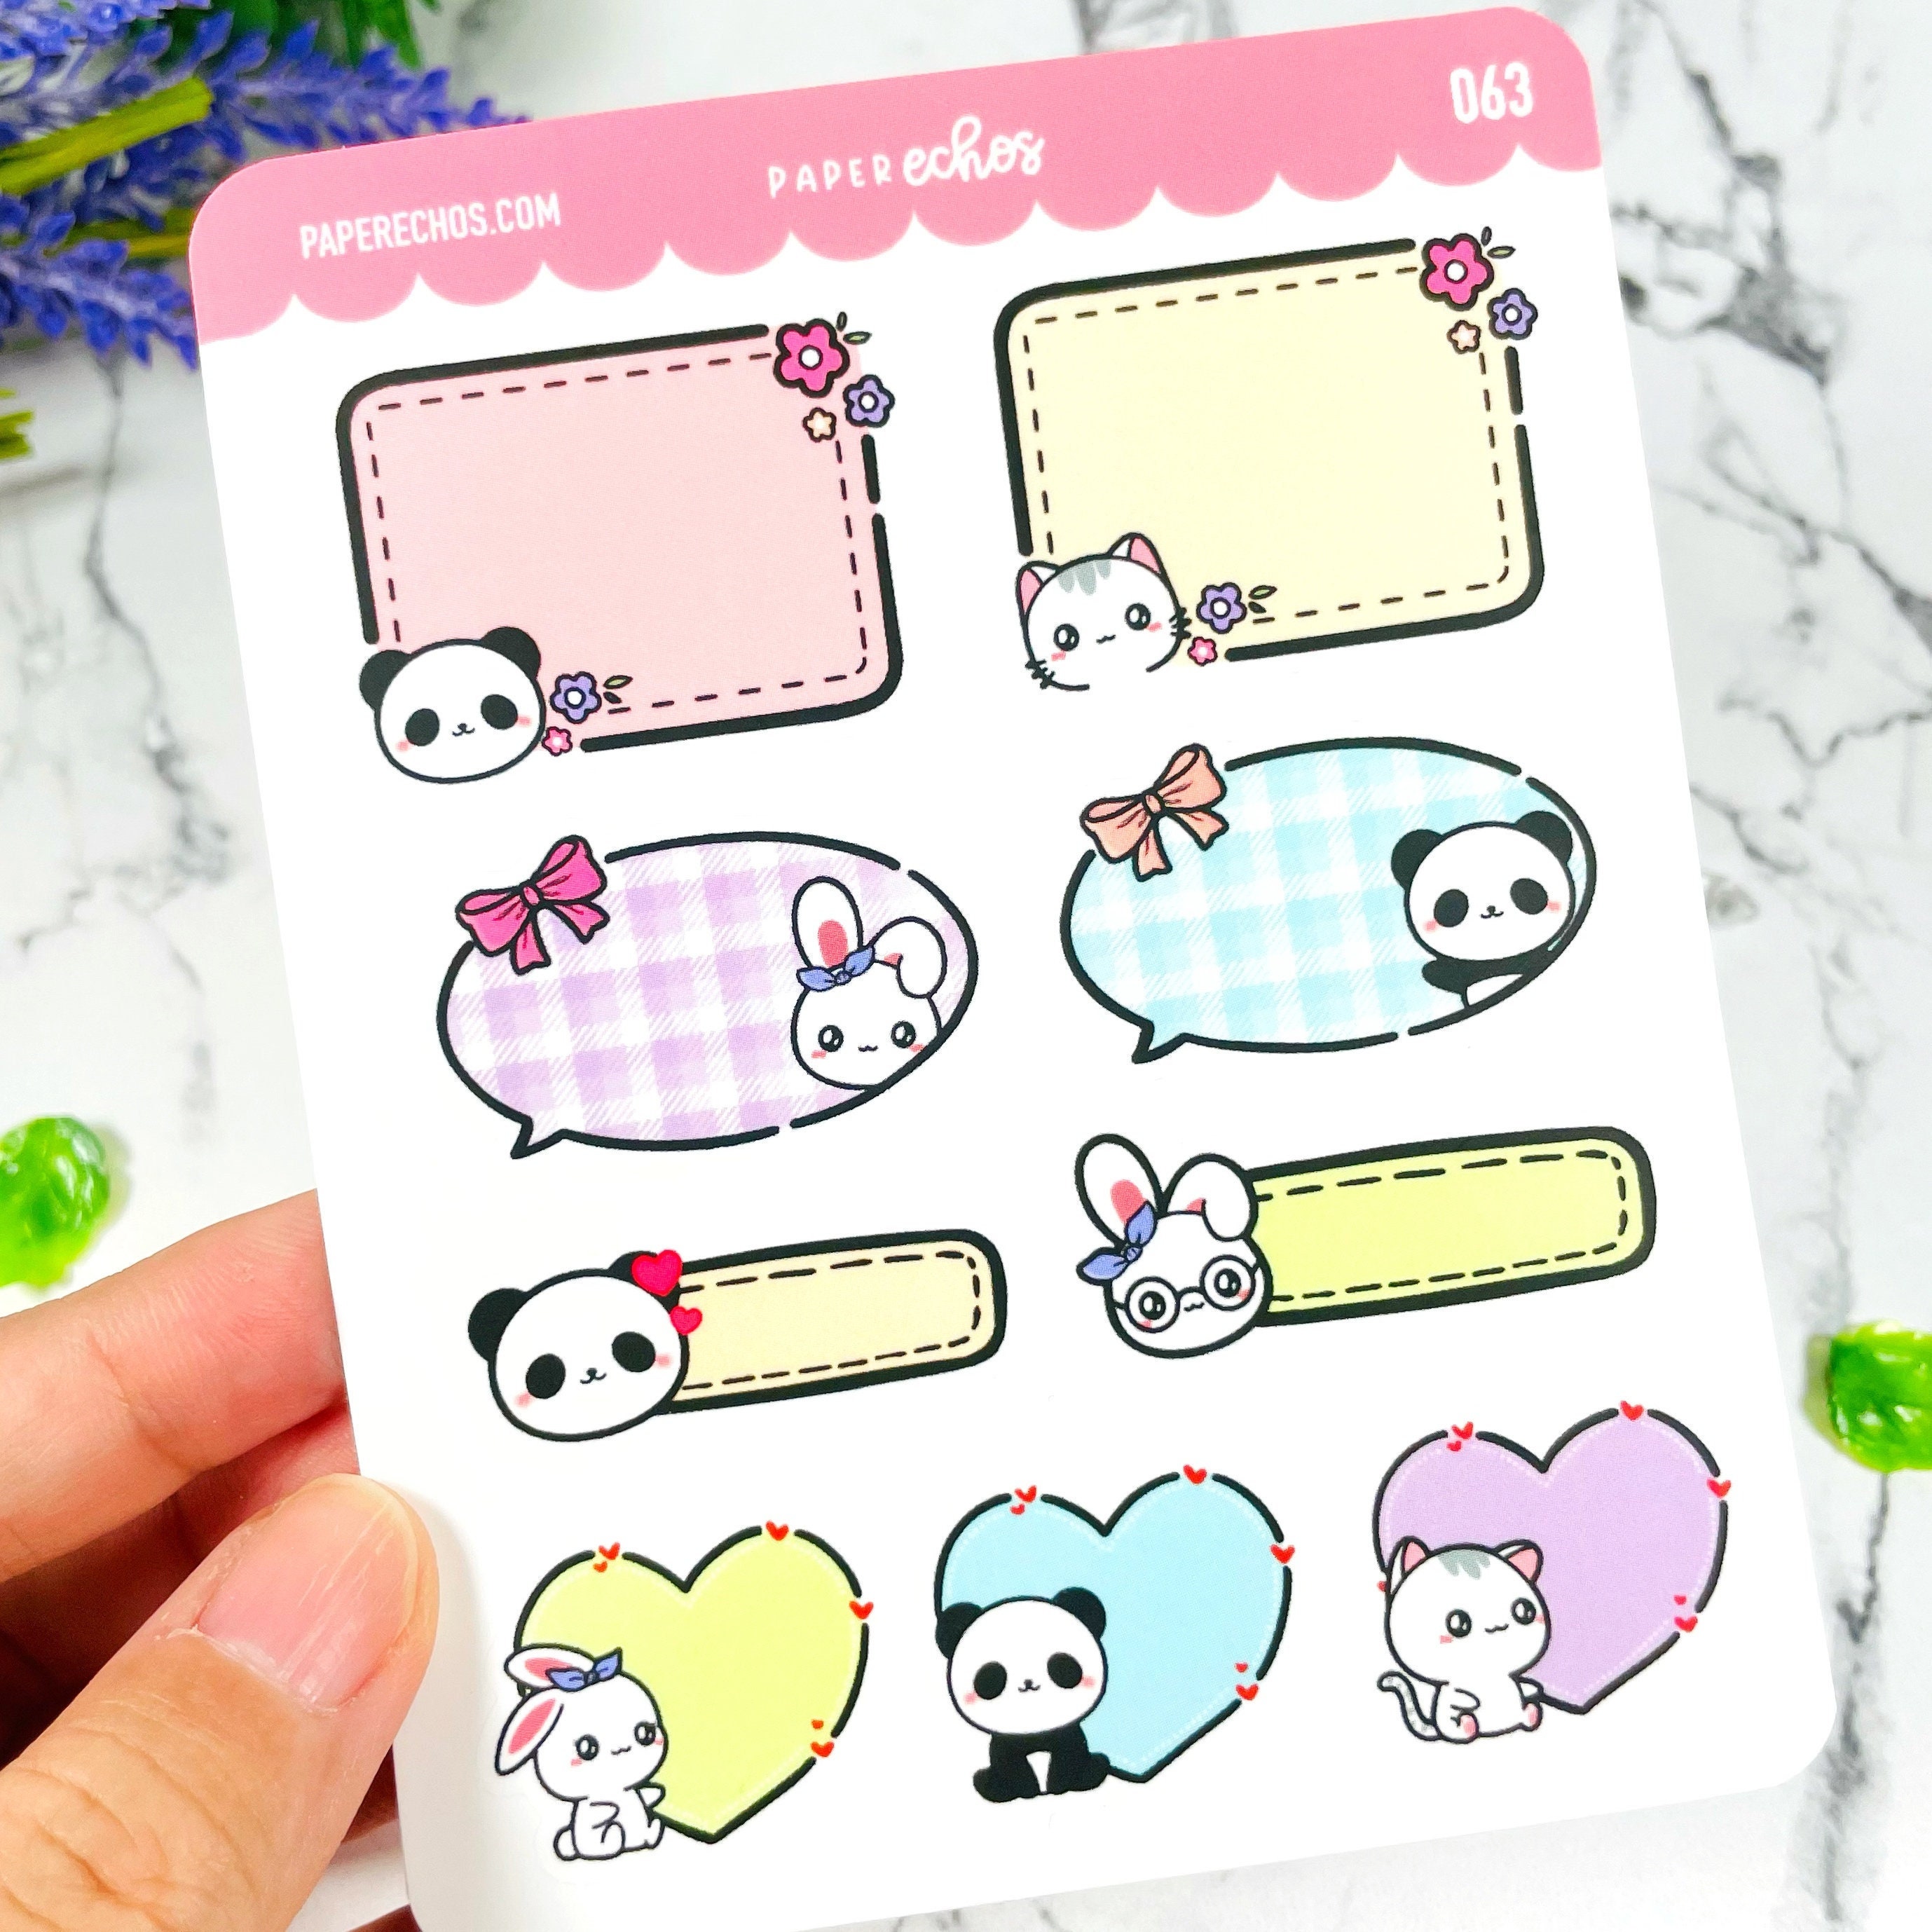 PASTEL RAINBOW 1/2 BOXES - HAND DRAWN PLANNER STICKERS - FS014 –  NERDYPAPERCO